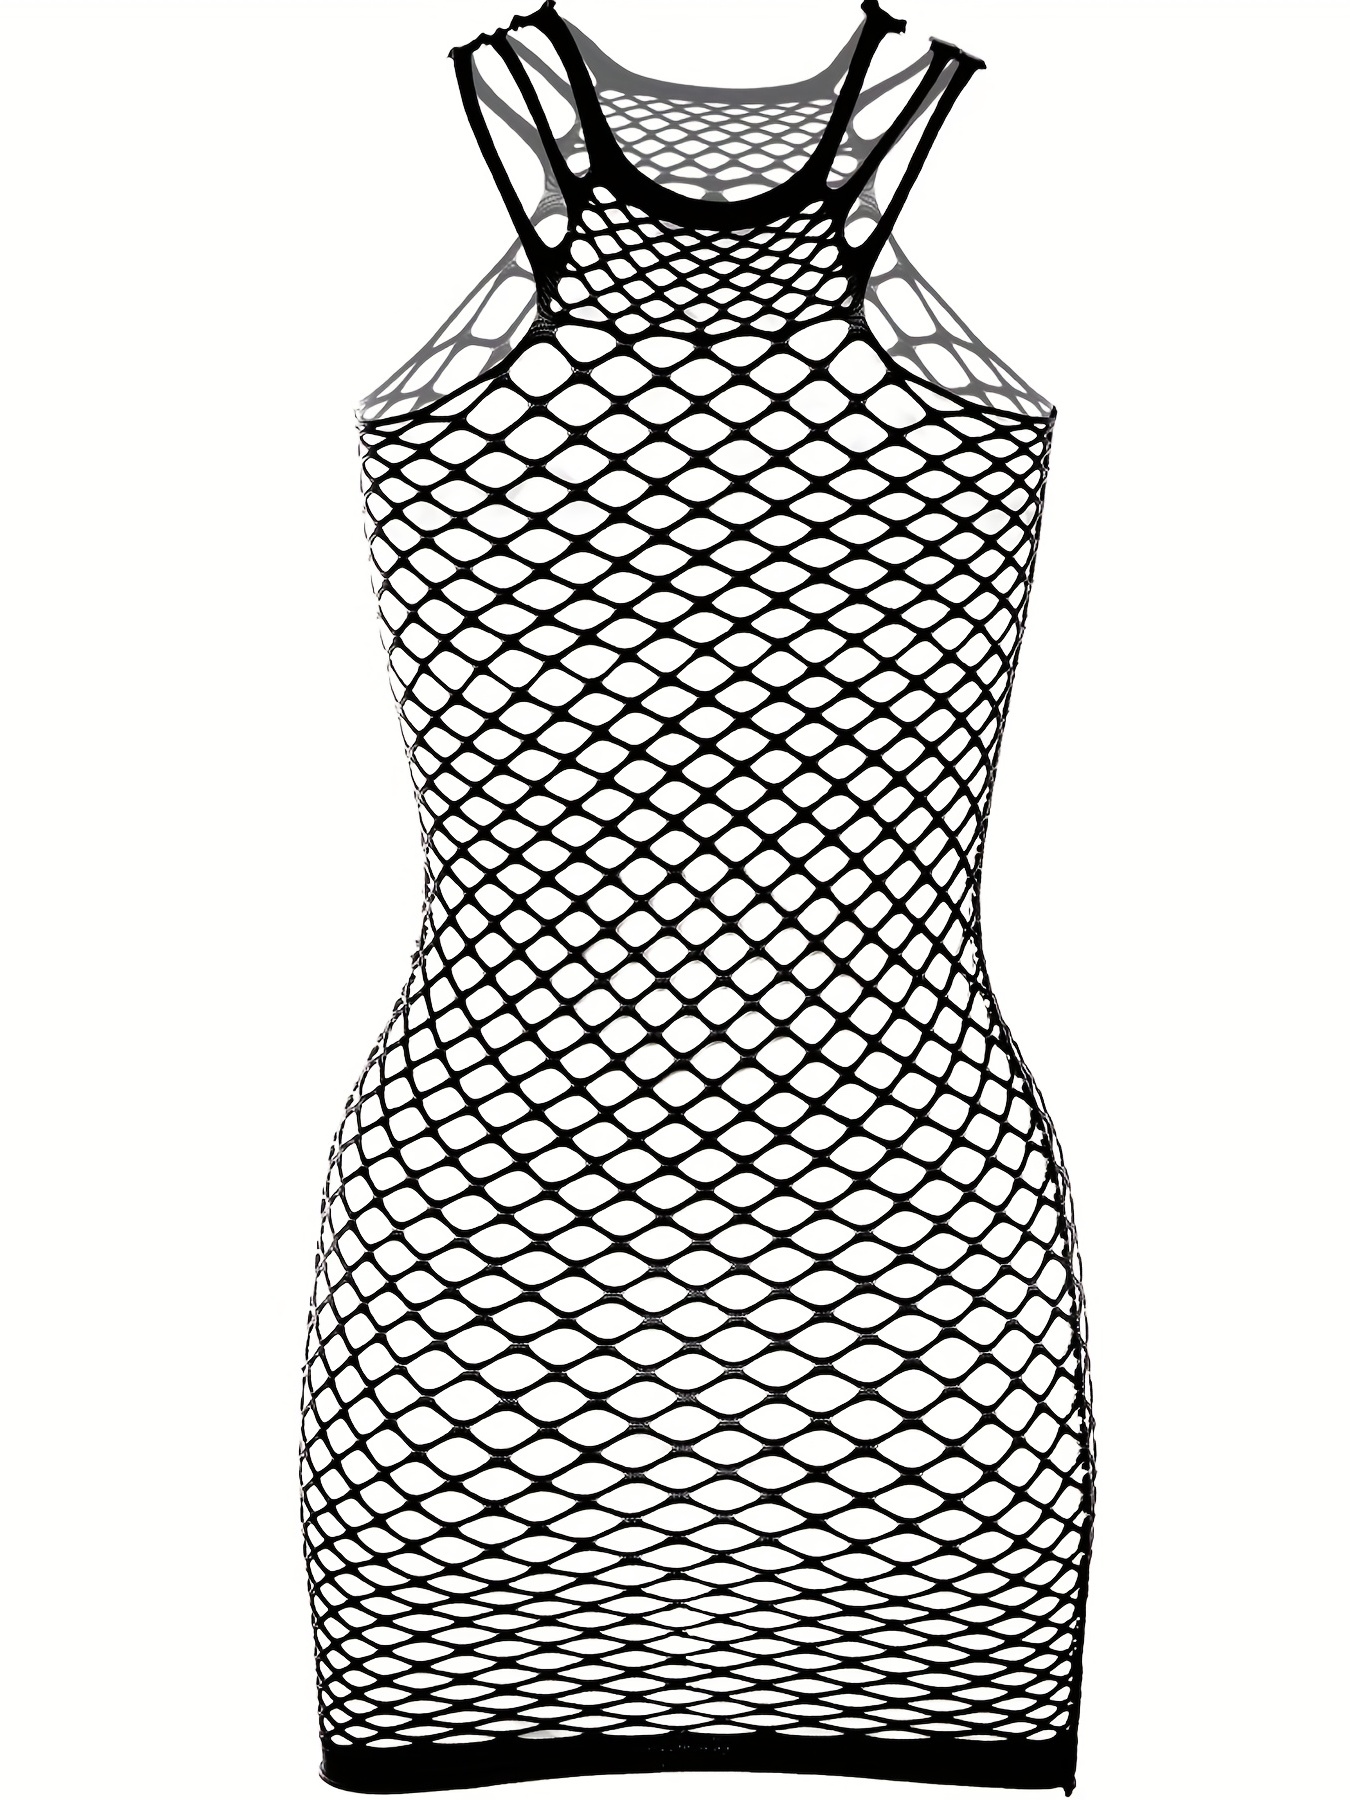 Fashion (Black -double Rope)Women Mesh Swimsuit Cover Up Sheer